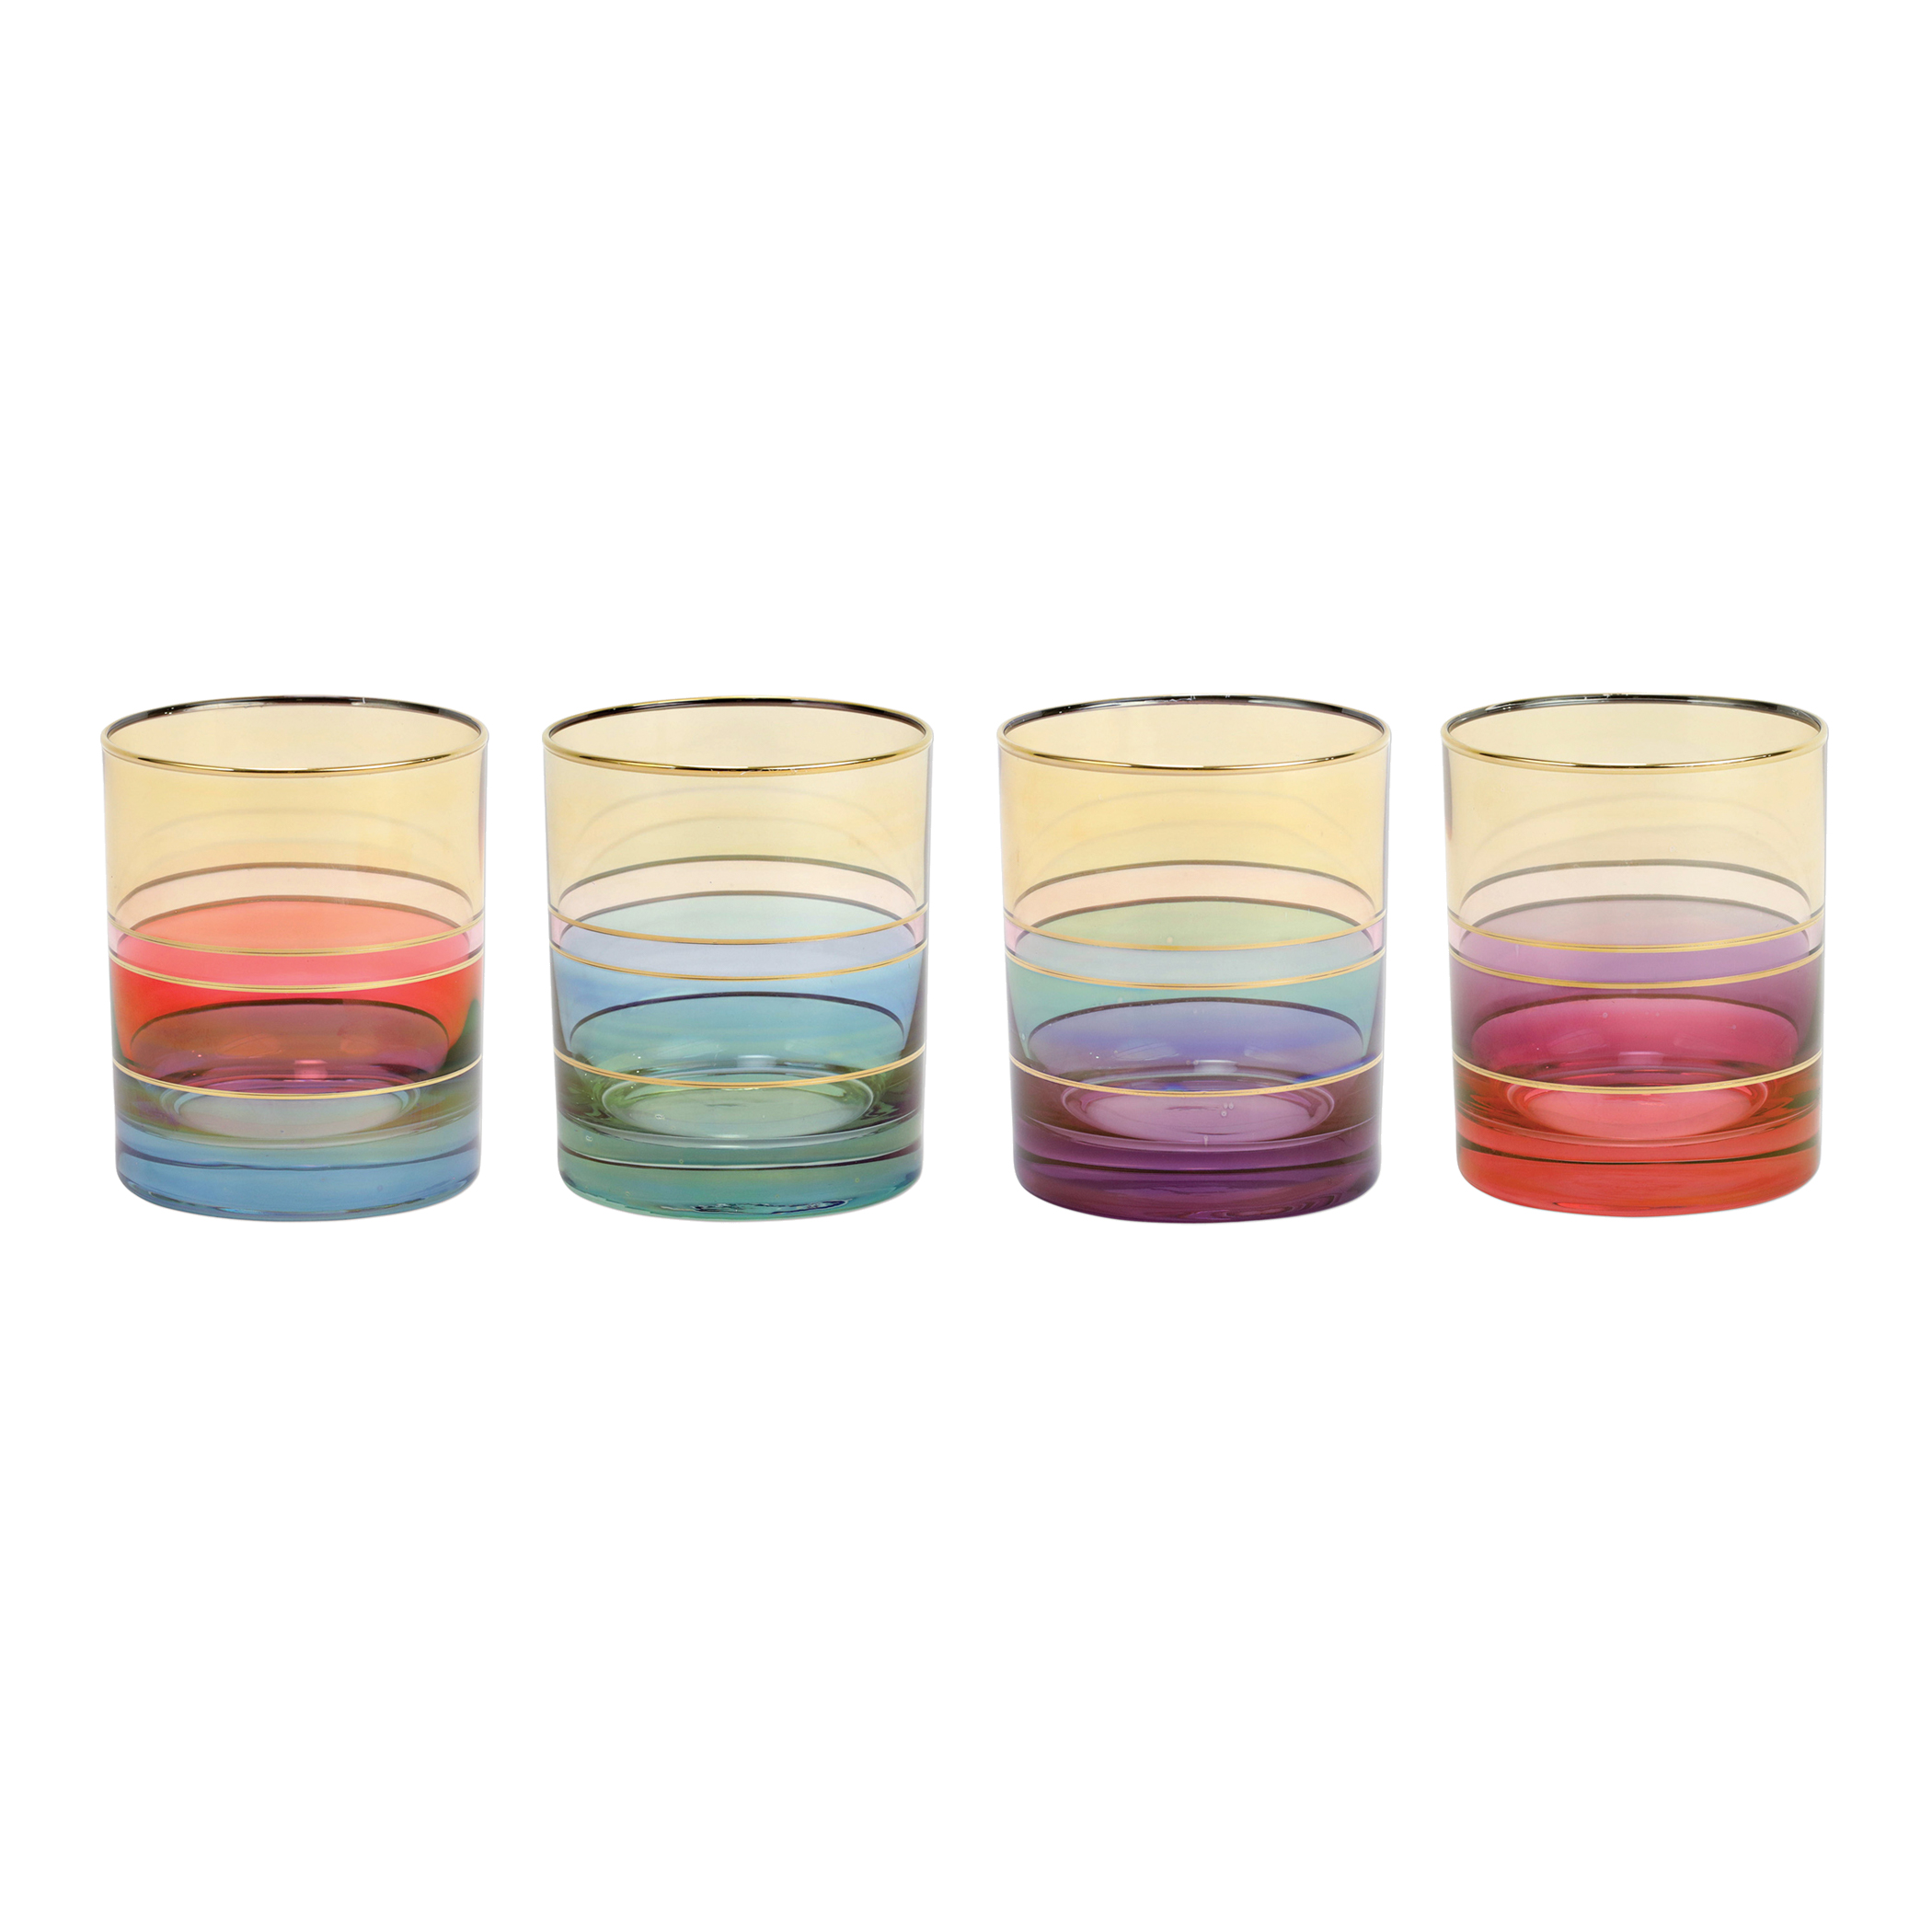 The Regalia Deco Double Old Fashioned glasses set add a contemporary, colorful touch to your drinkware collection. Available at Charleston home decor store GDC Home